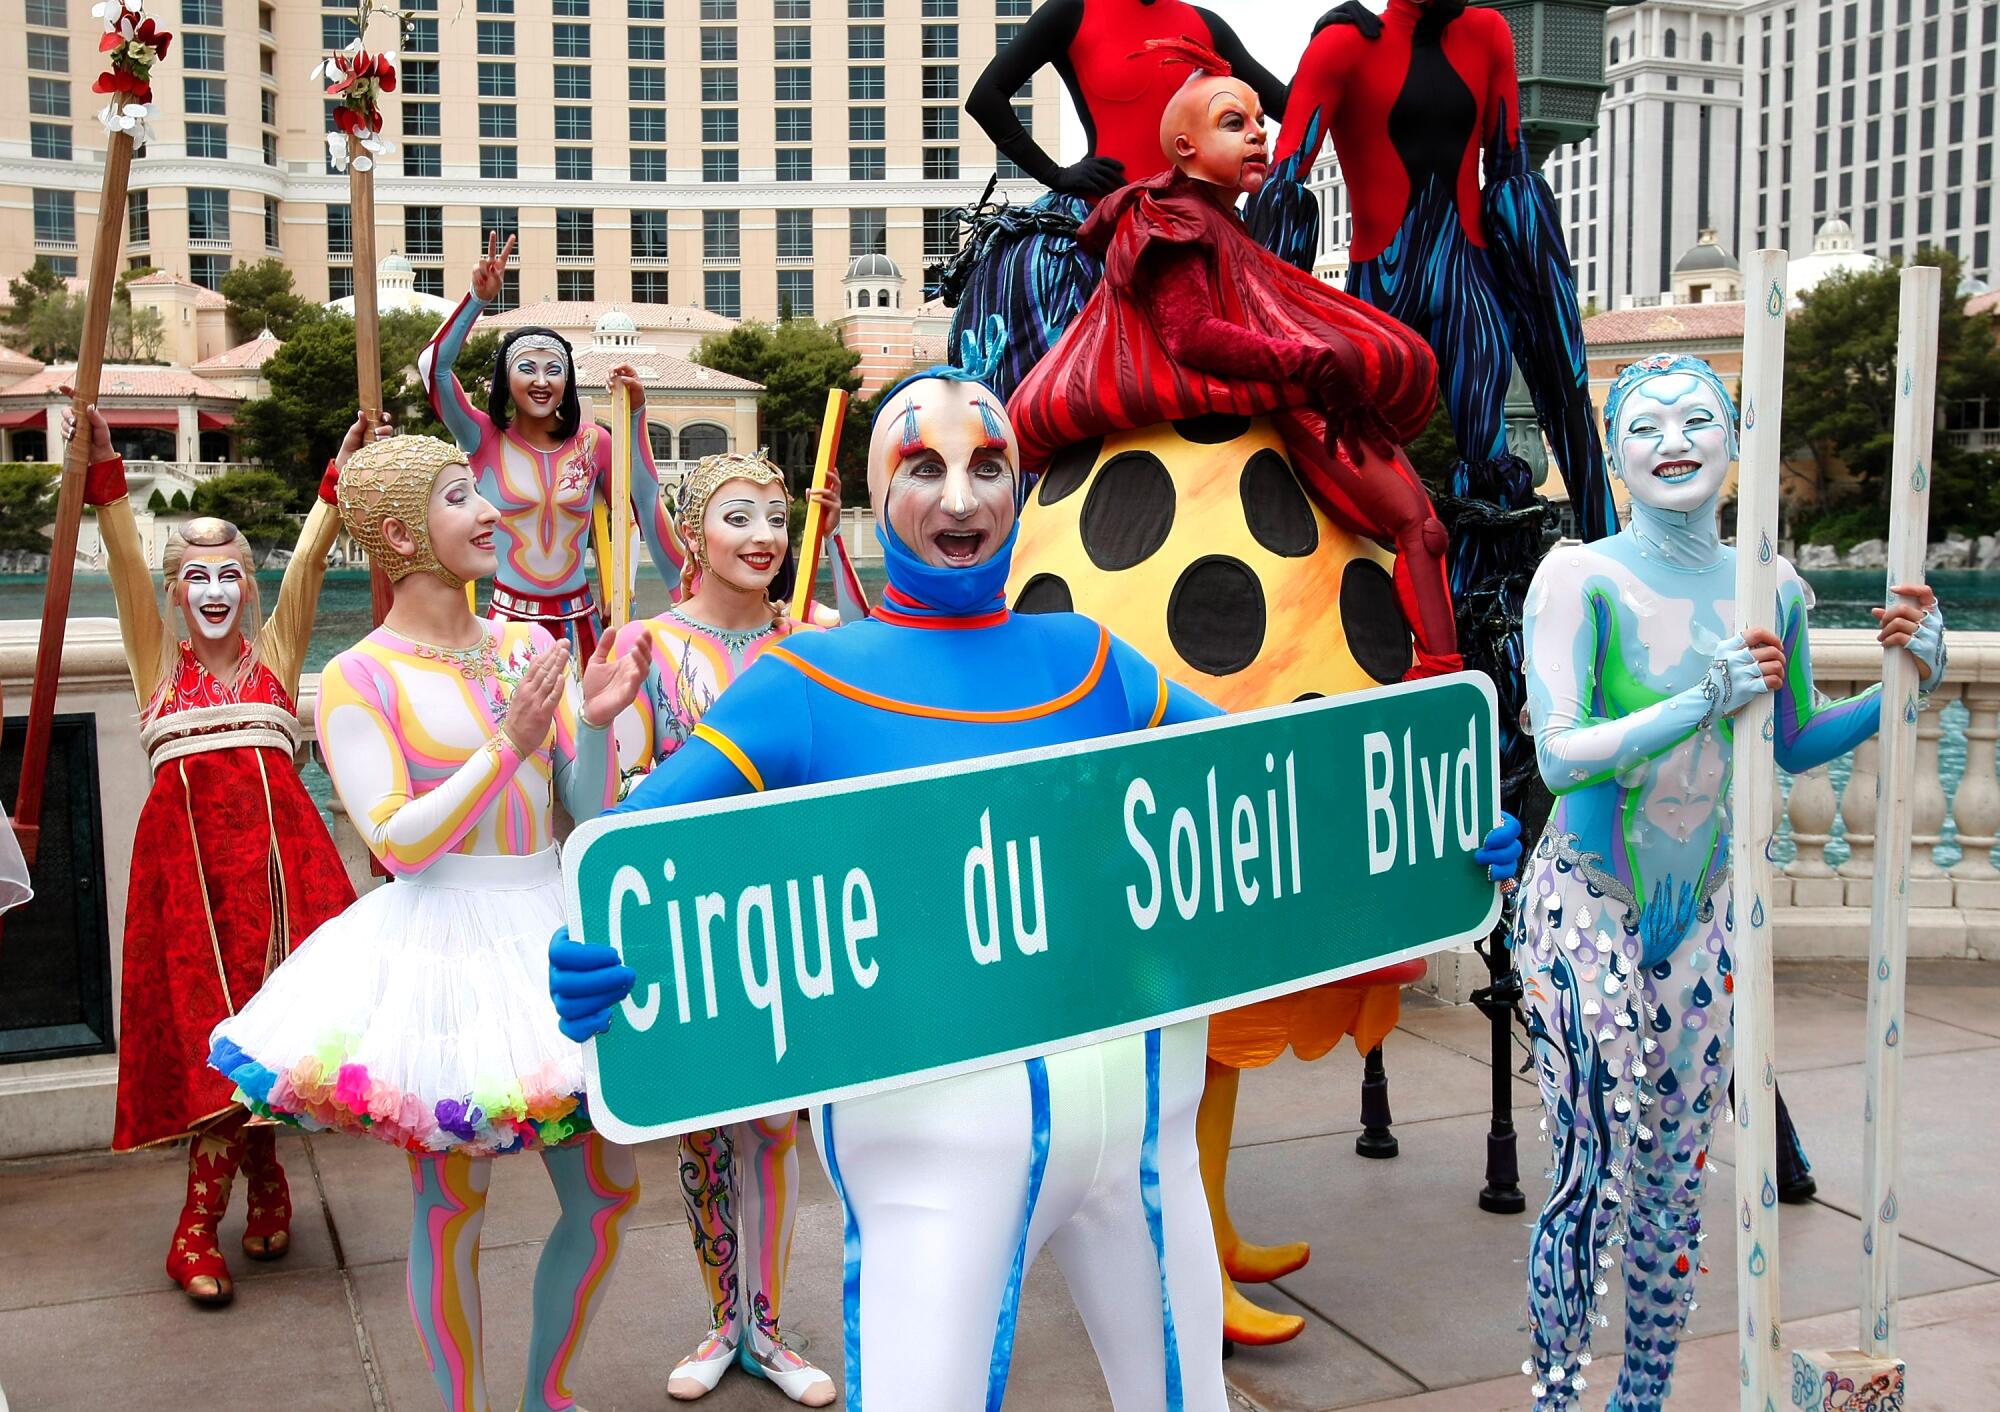 A performer holds a street sign with the words "Cirque du Soleil Blvd" as other performers stand nearby.